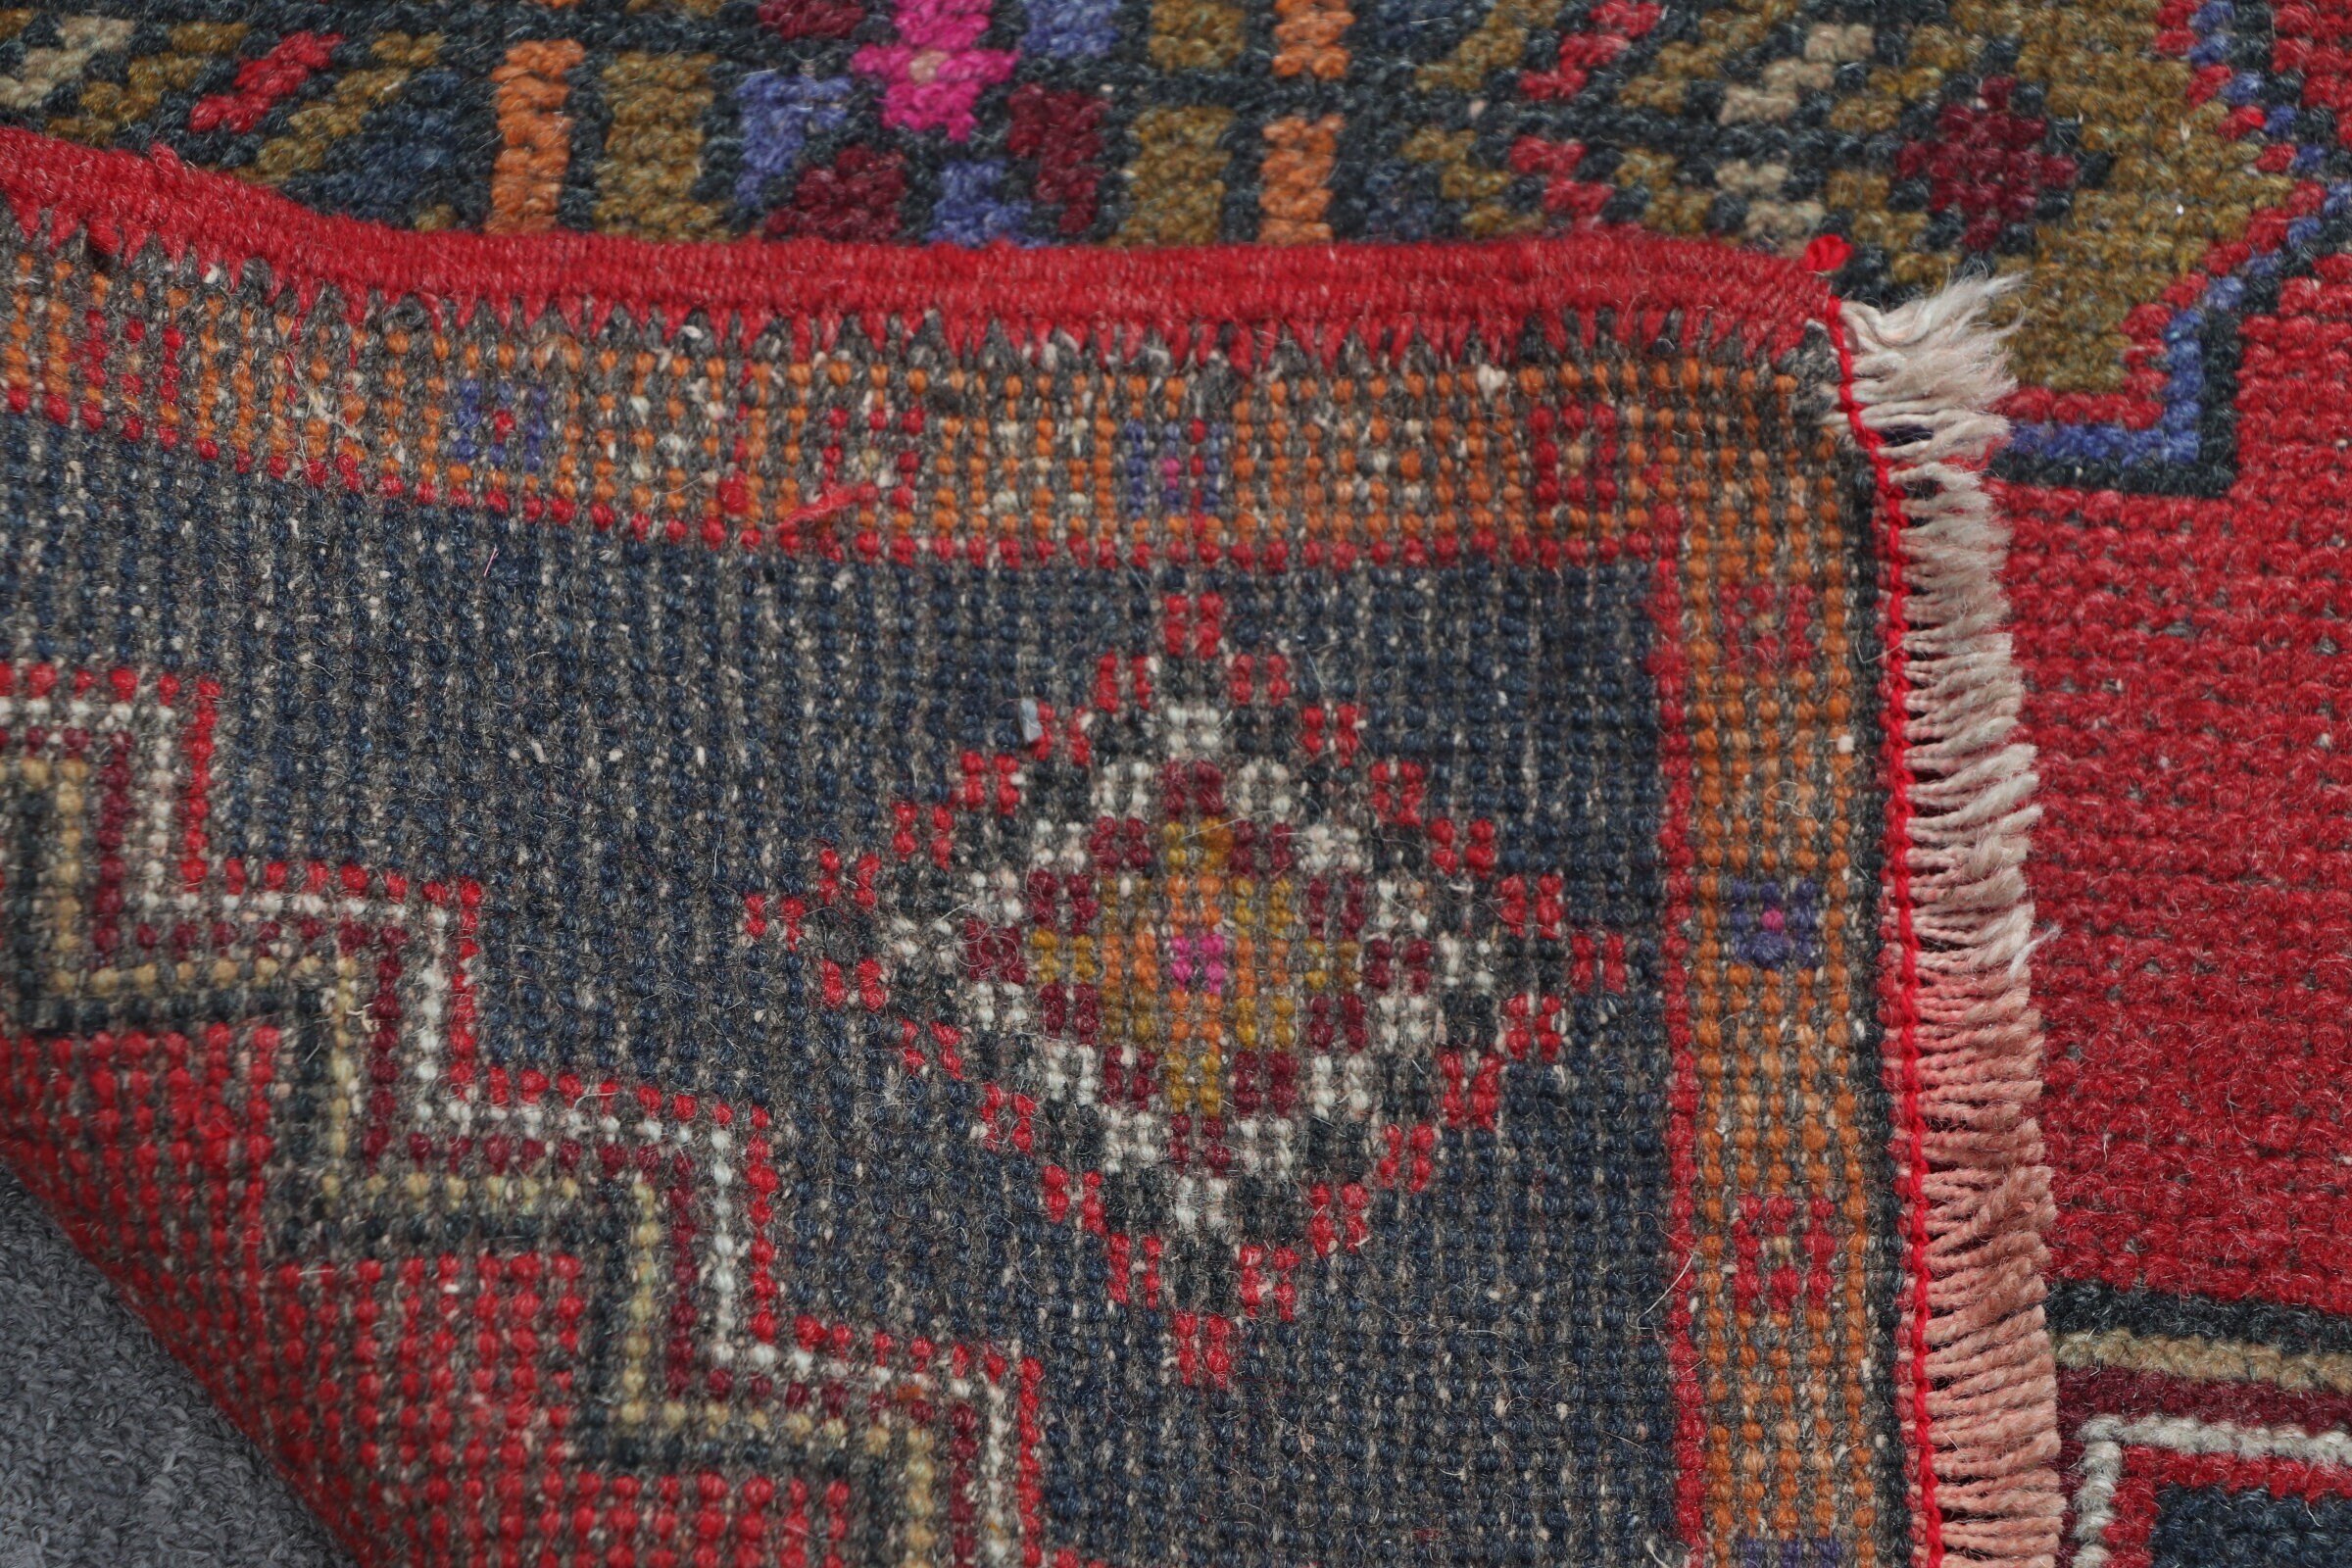 Rugs for Entry, Turkish Rugs, Vintage Rugs, Red Kitchen Rug, Bedroom Rugs, Bathroom Rug, Bath Rugs, 1.8x3.1 ft Small Rugs, Moroccan Rug